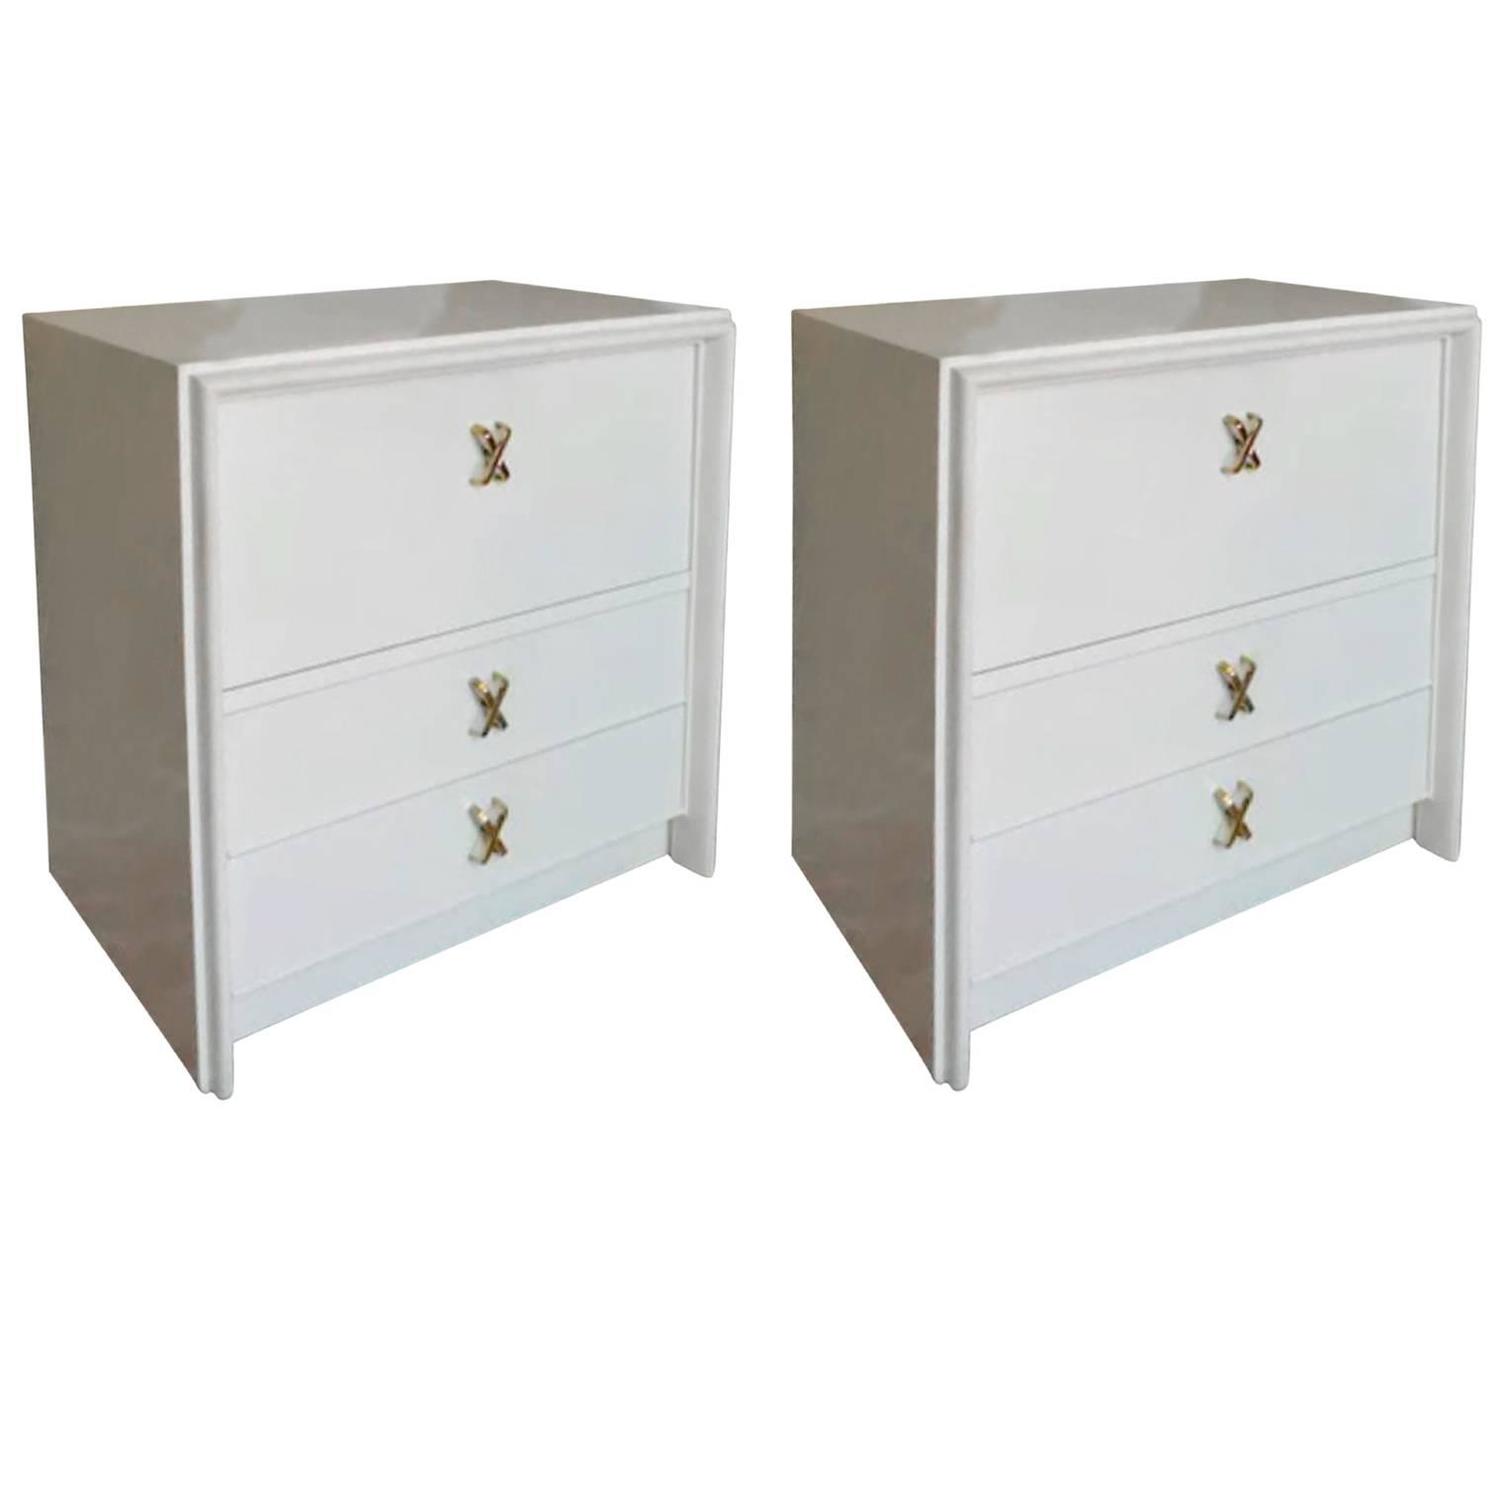 Pair of Off White Lacquer Nightstands by Paul Frankl For Sale at 1stdibs